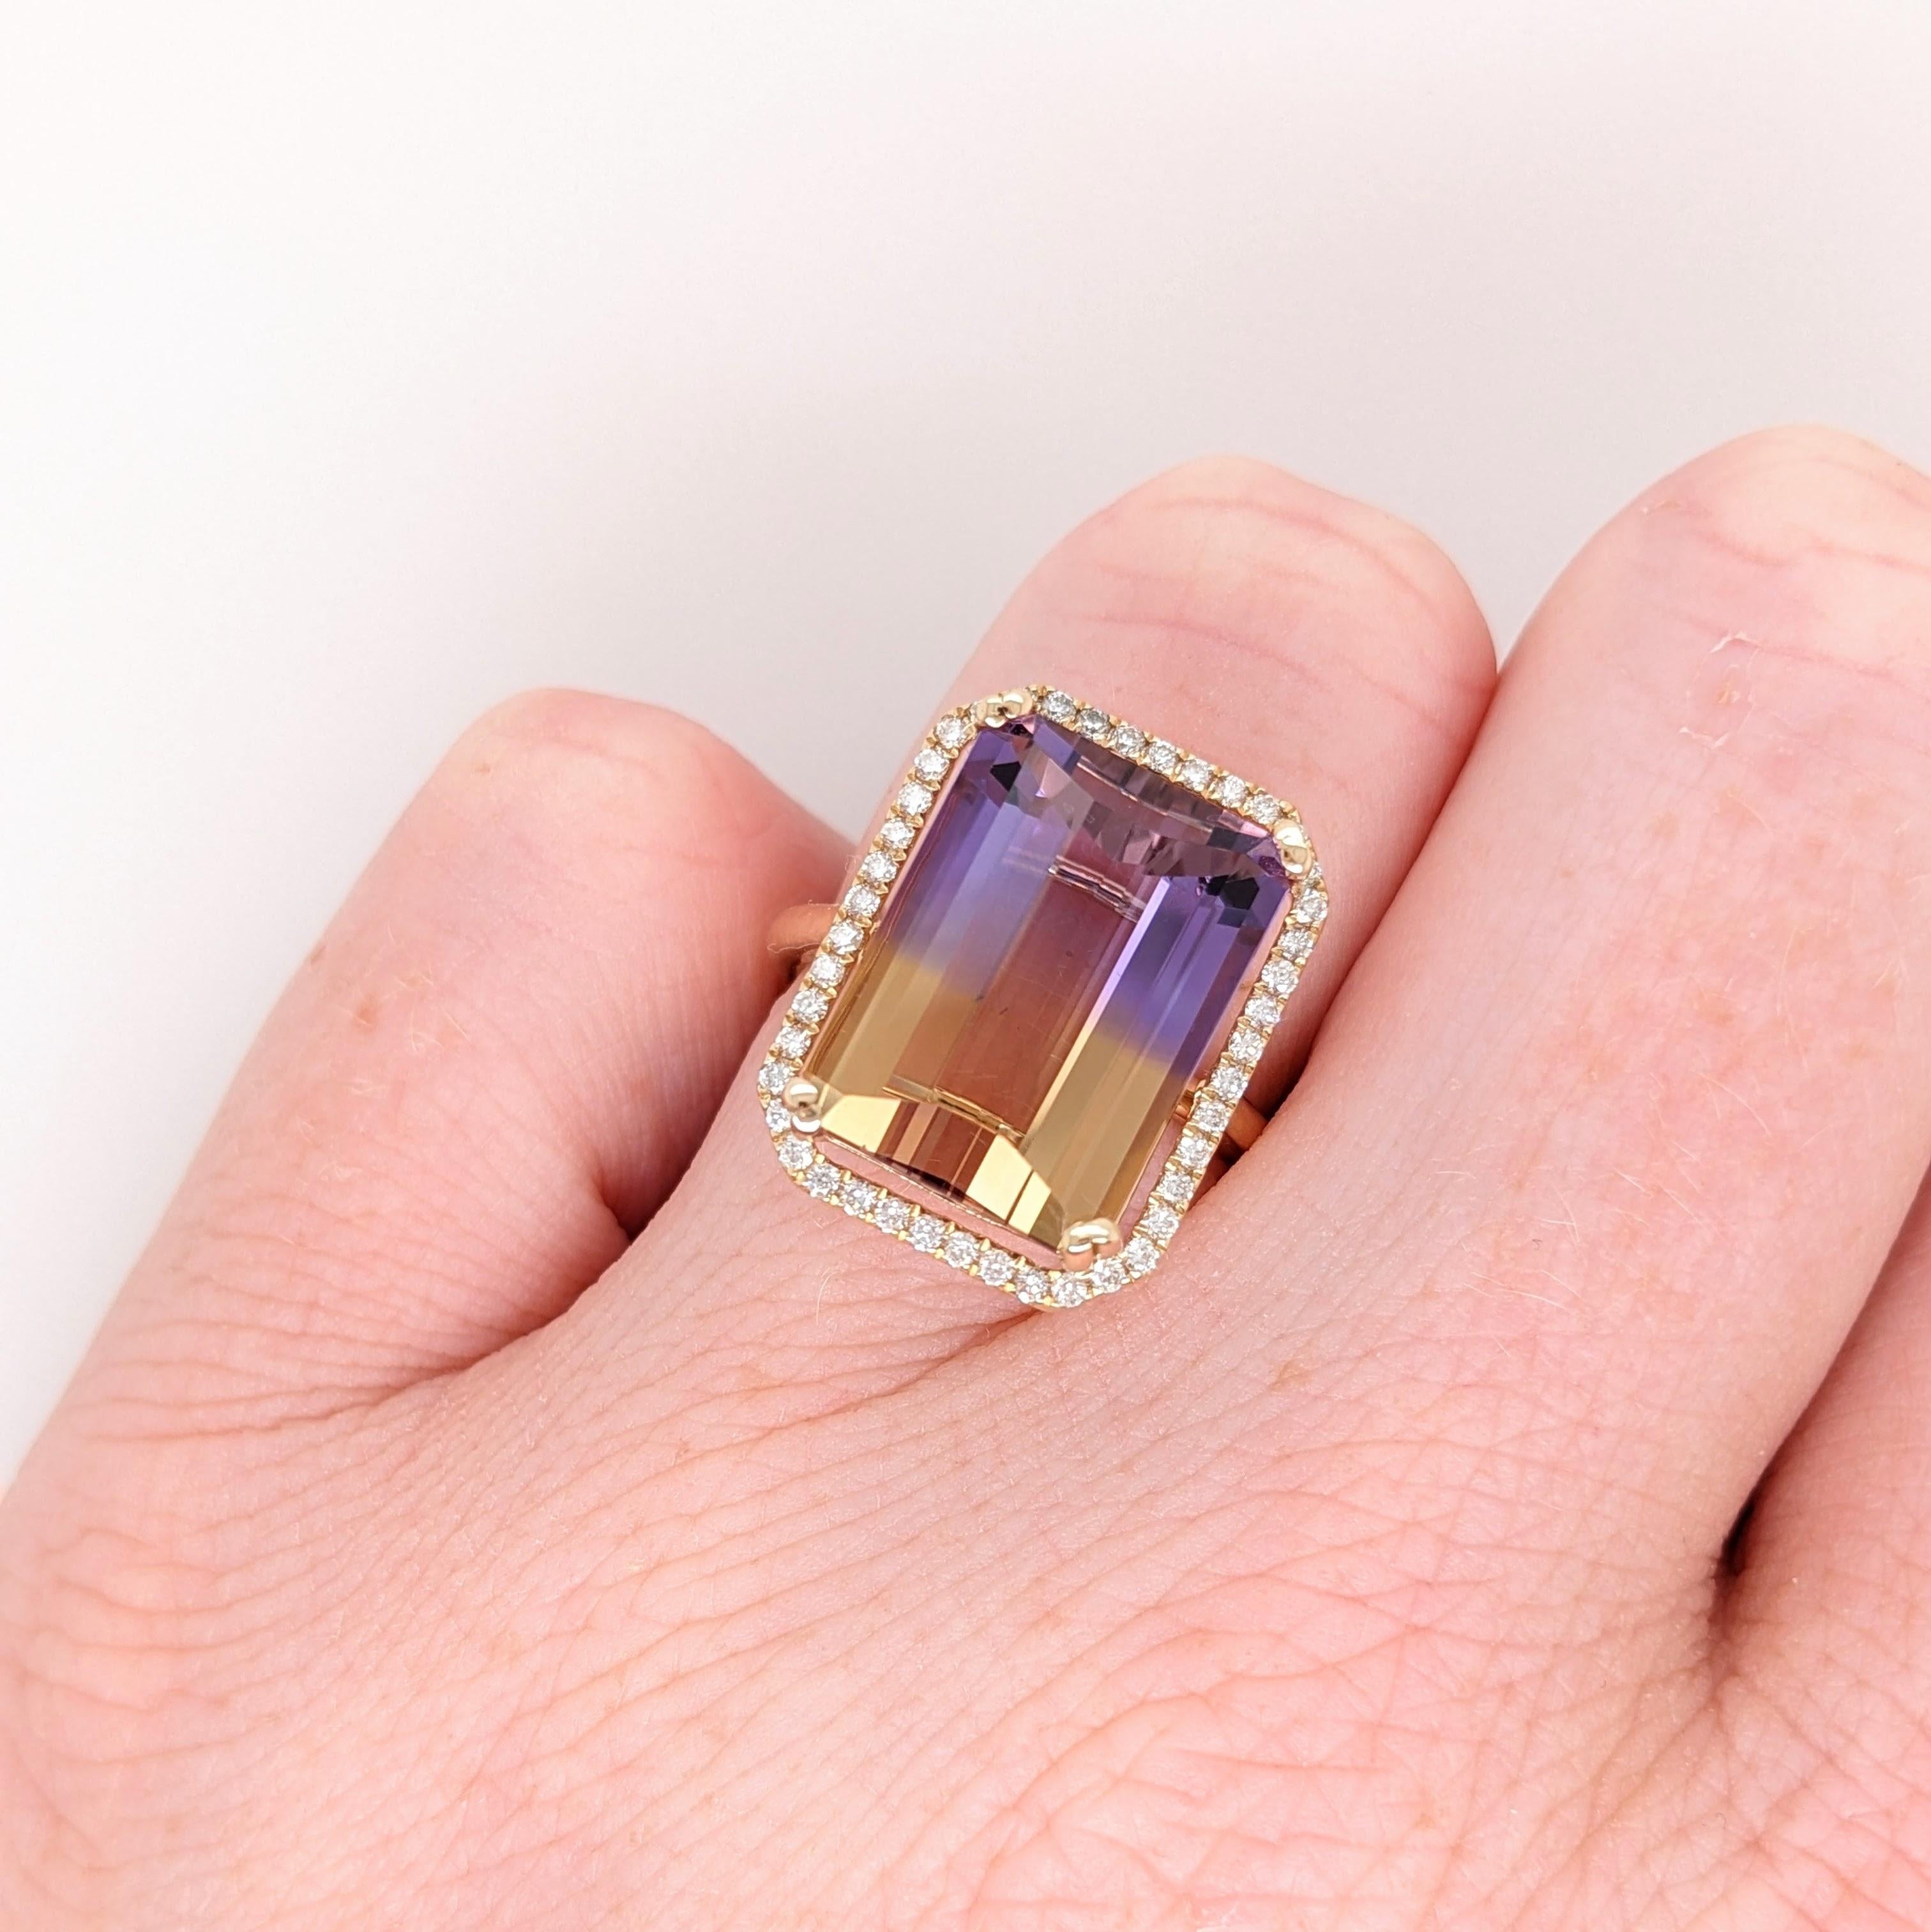 Specifications:

Item Type: Ring
Stone: Ametrine
Stone size: 16x12mm
Stone weight: 9.70cts
Treatment: Heated
Hardness: 7
Cut: Faceted 
Clarity: Eye-clean

Shape: Emerald Cut
Cut: Faceted / Barrel Cut

14k Gold Wt: 4.33gms
Diamonds S/I GH: